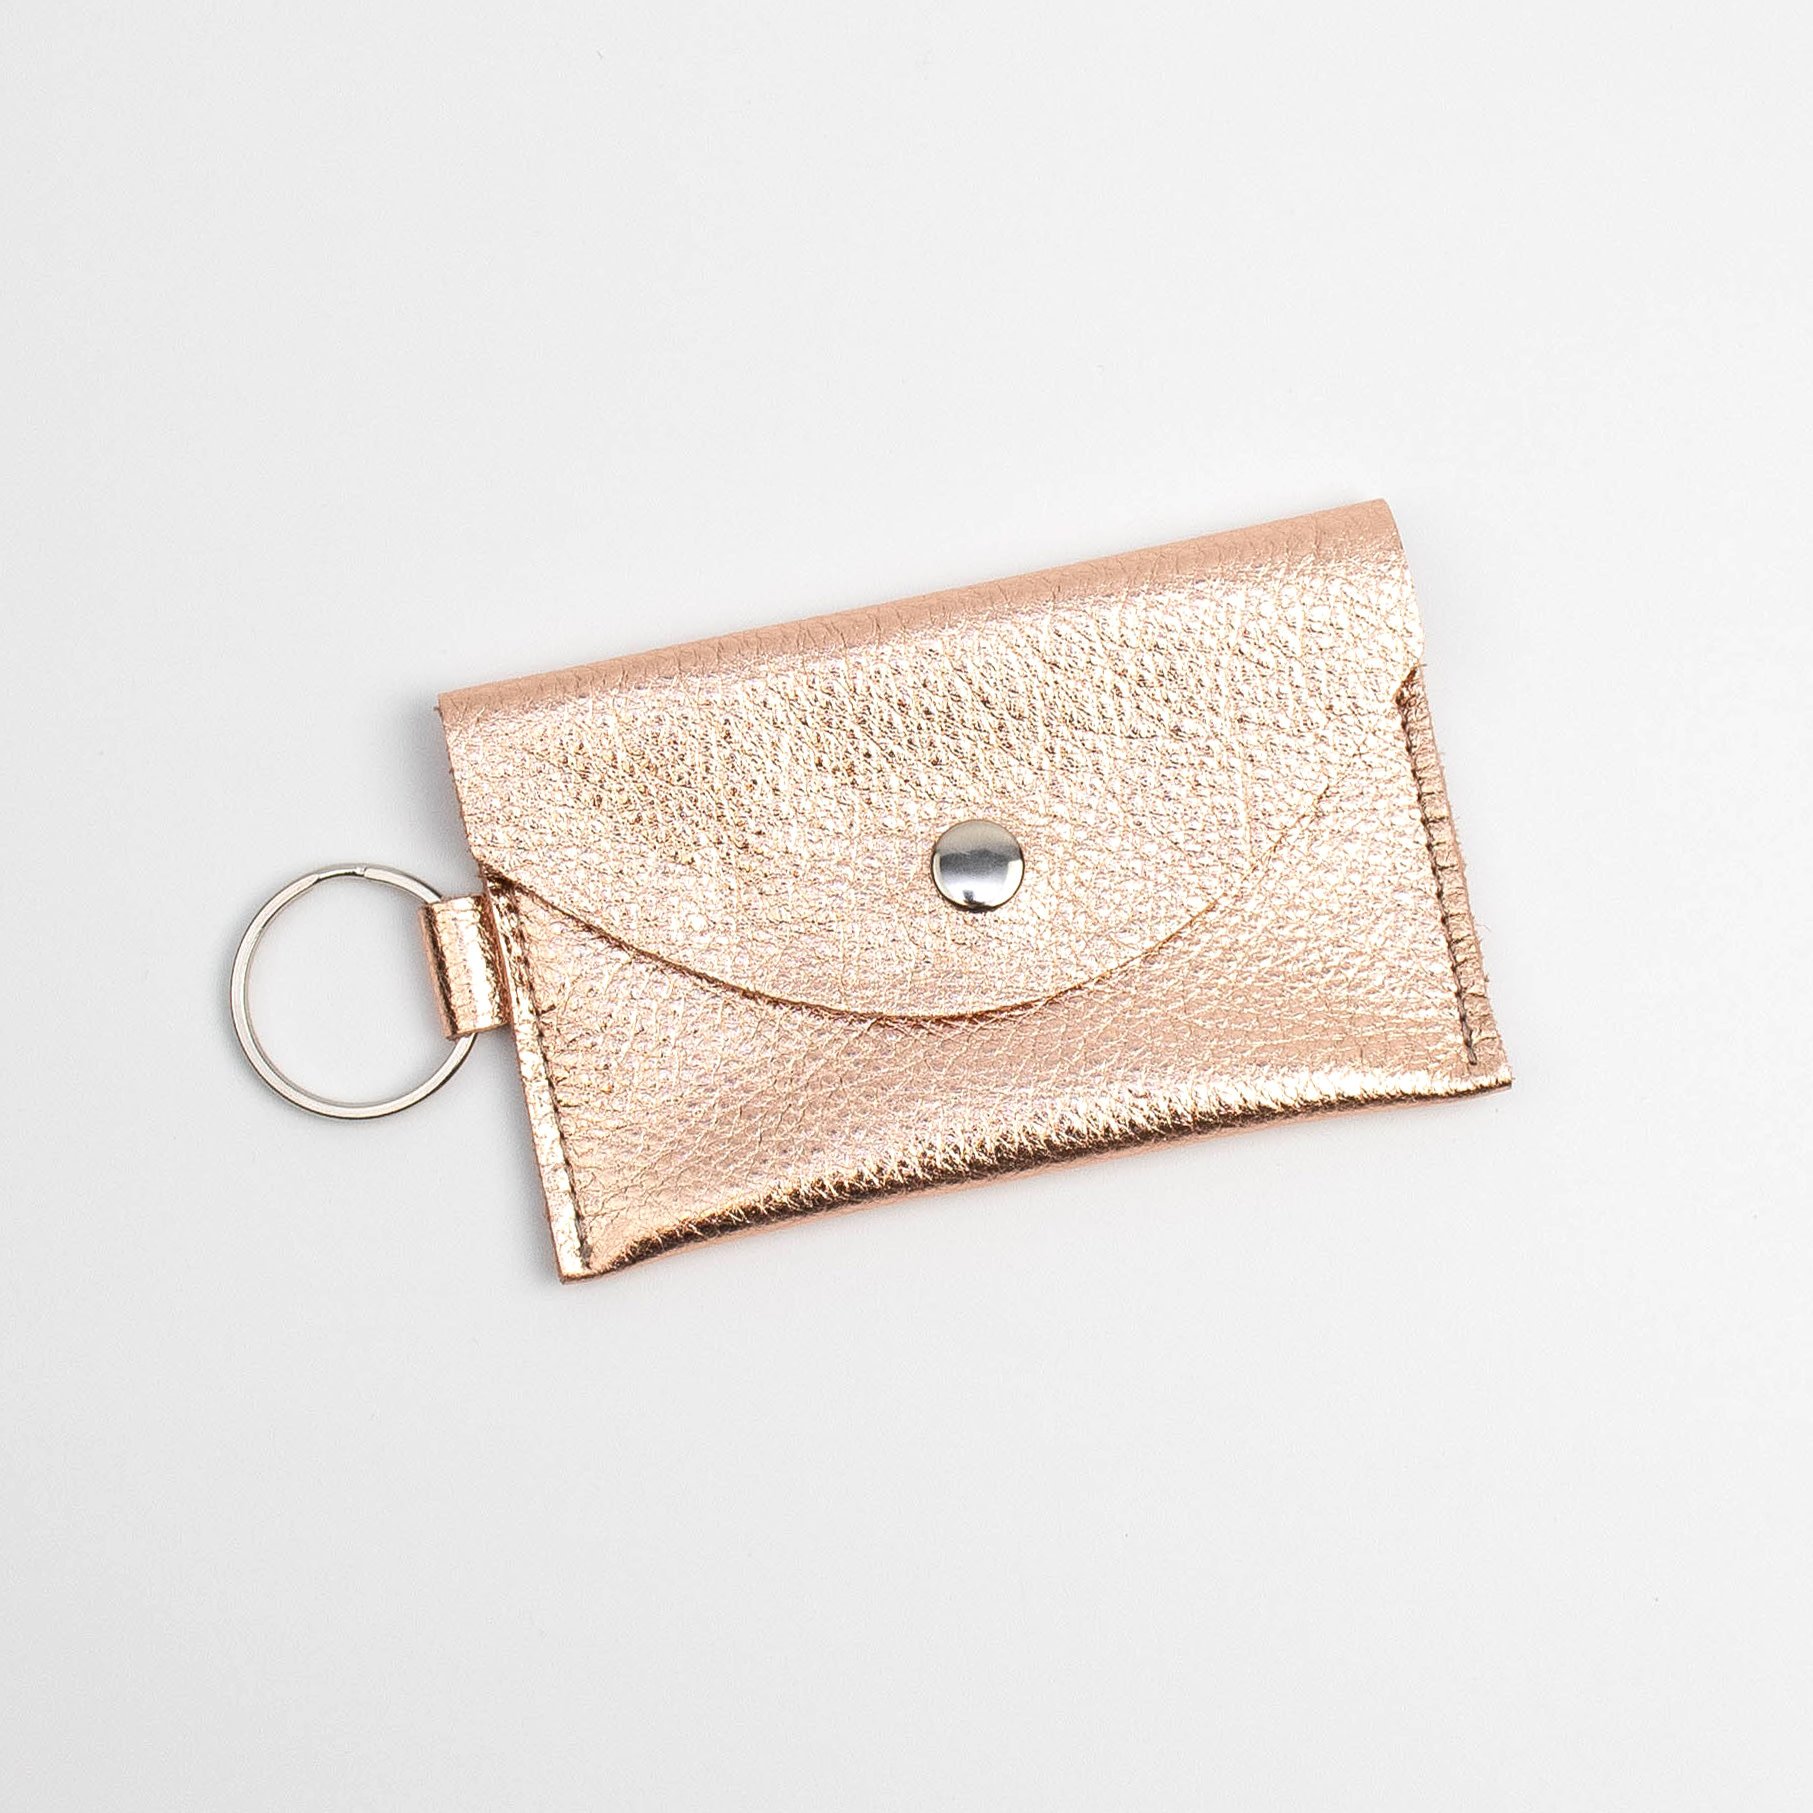 Metallic Rose Gold Lip Clutch With Chain | Metallic purse, Gold lips, Rose  gold clutch